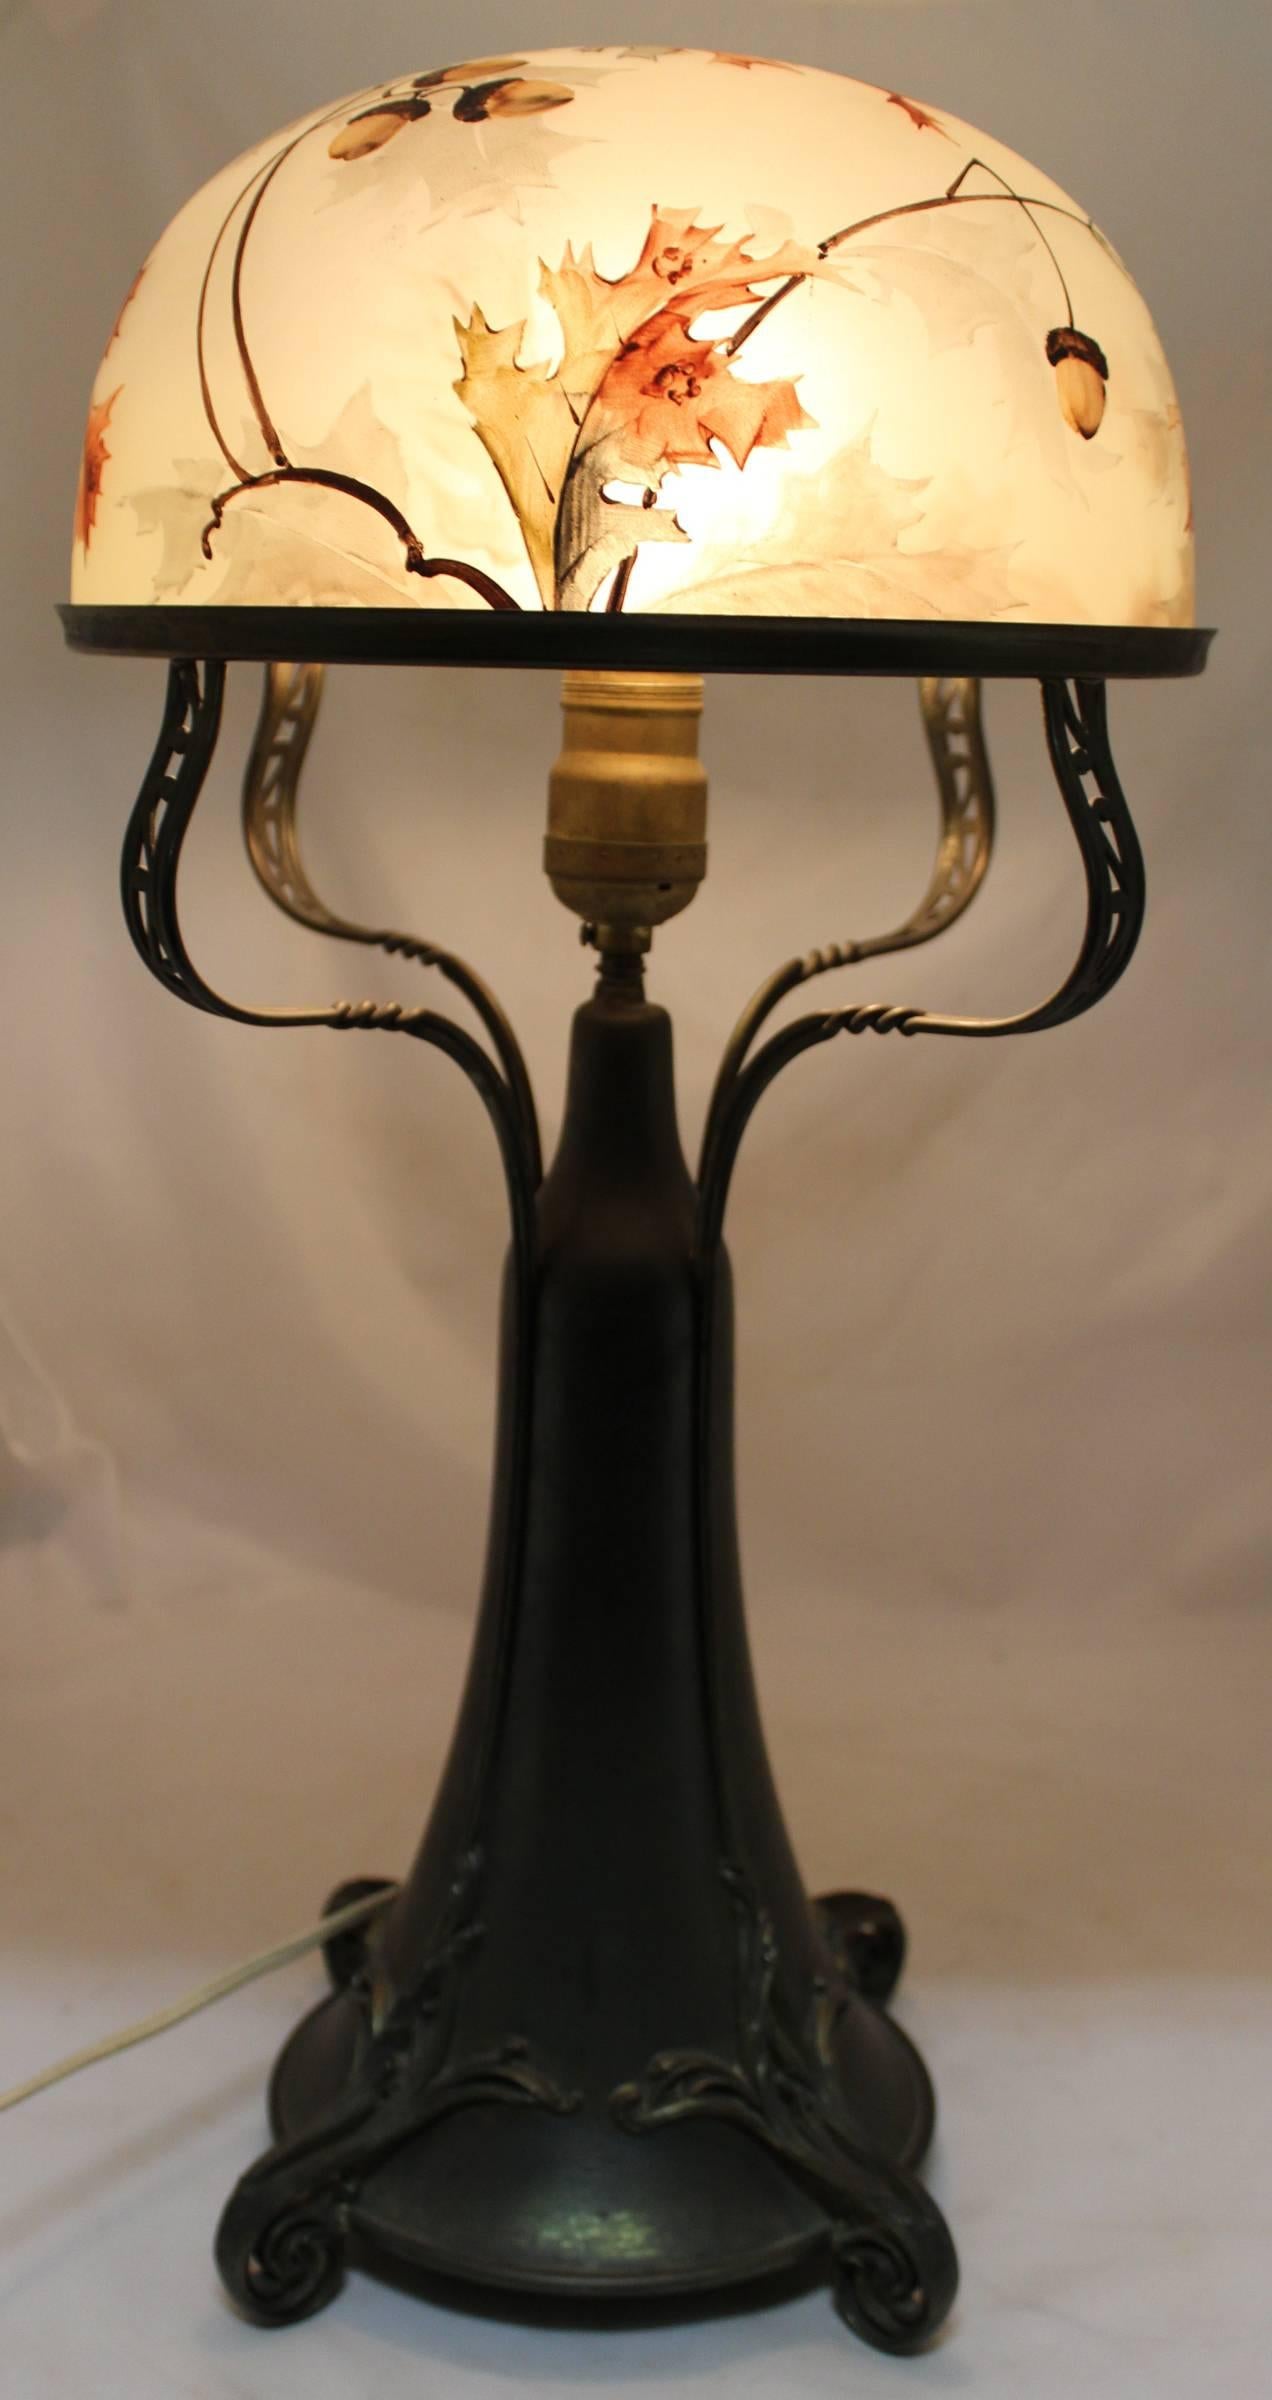 A splendid Art Nouveau table lamp with signed Pairpoint frosted dome shade in a polychrome hand-painted oak leaf and acorn motif in earth tones, supported by four twisted and pierced arms on a scroll footed brassed metal base with great patina. The